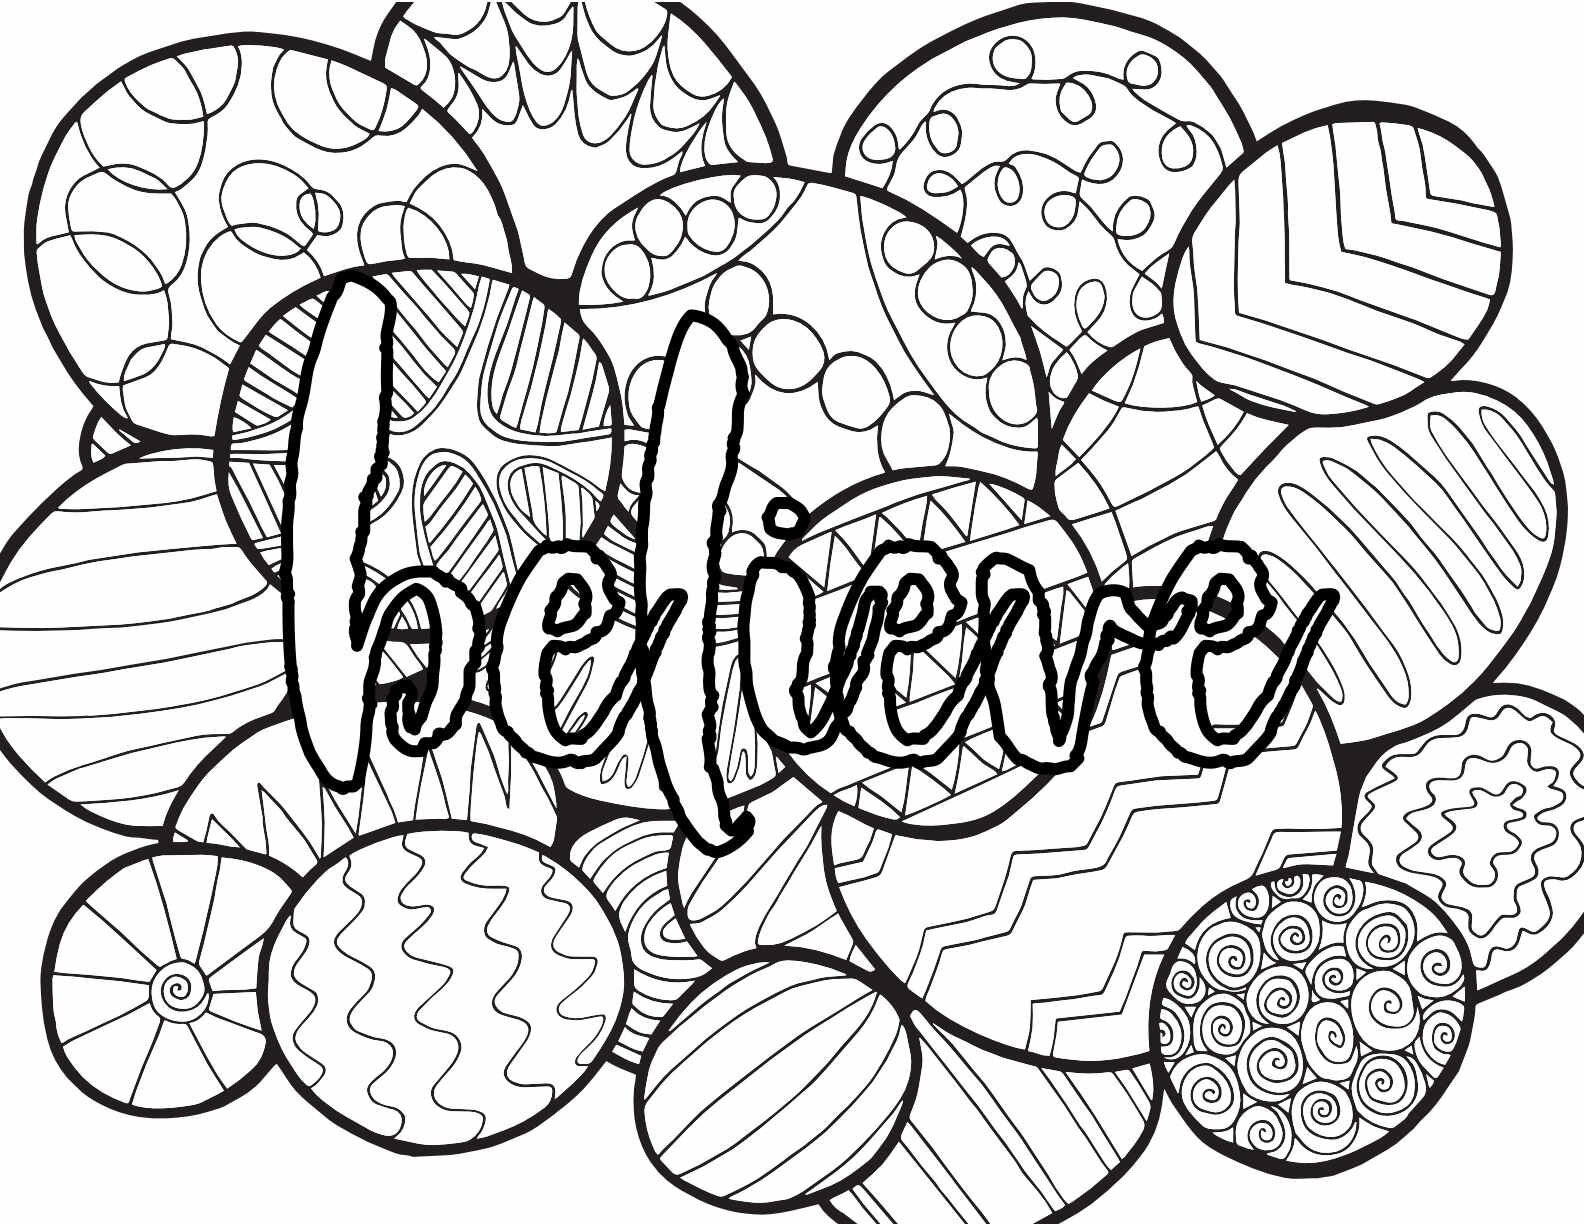 BELIEVE 20 Free Printable Coloring Pages — Stevie Doodles Free ...